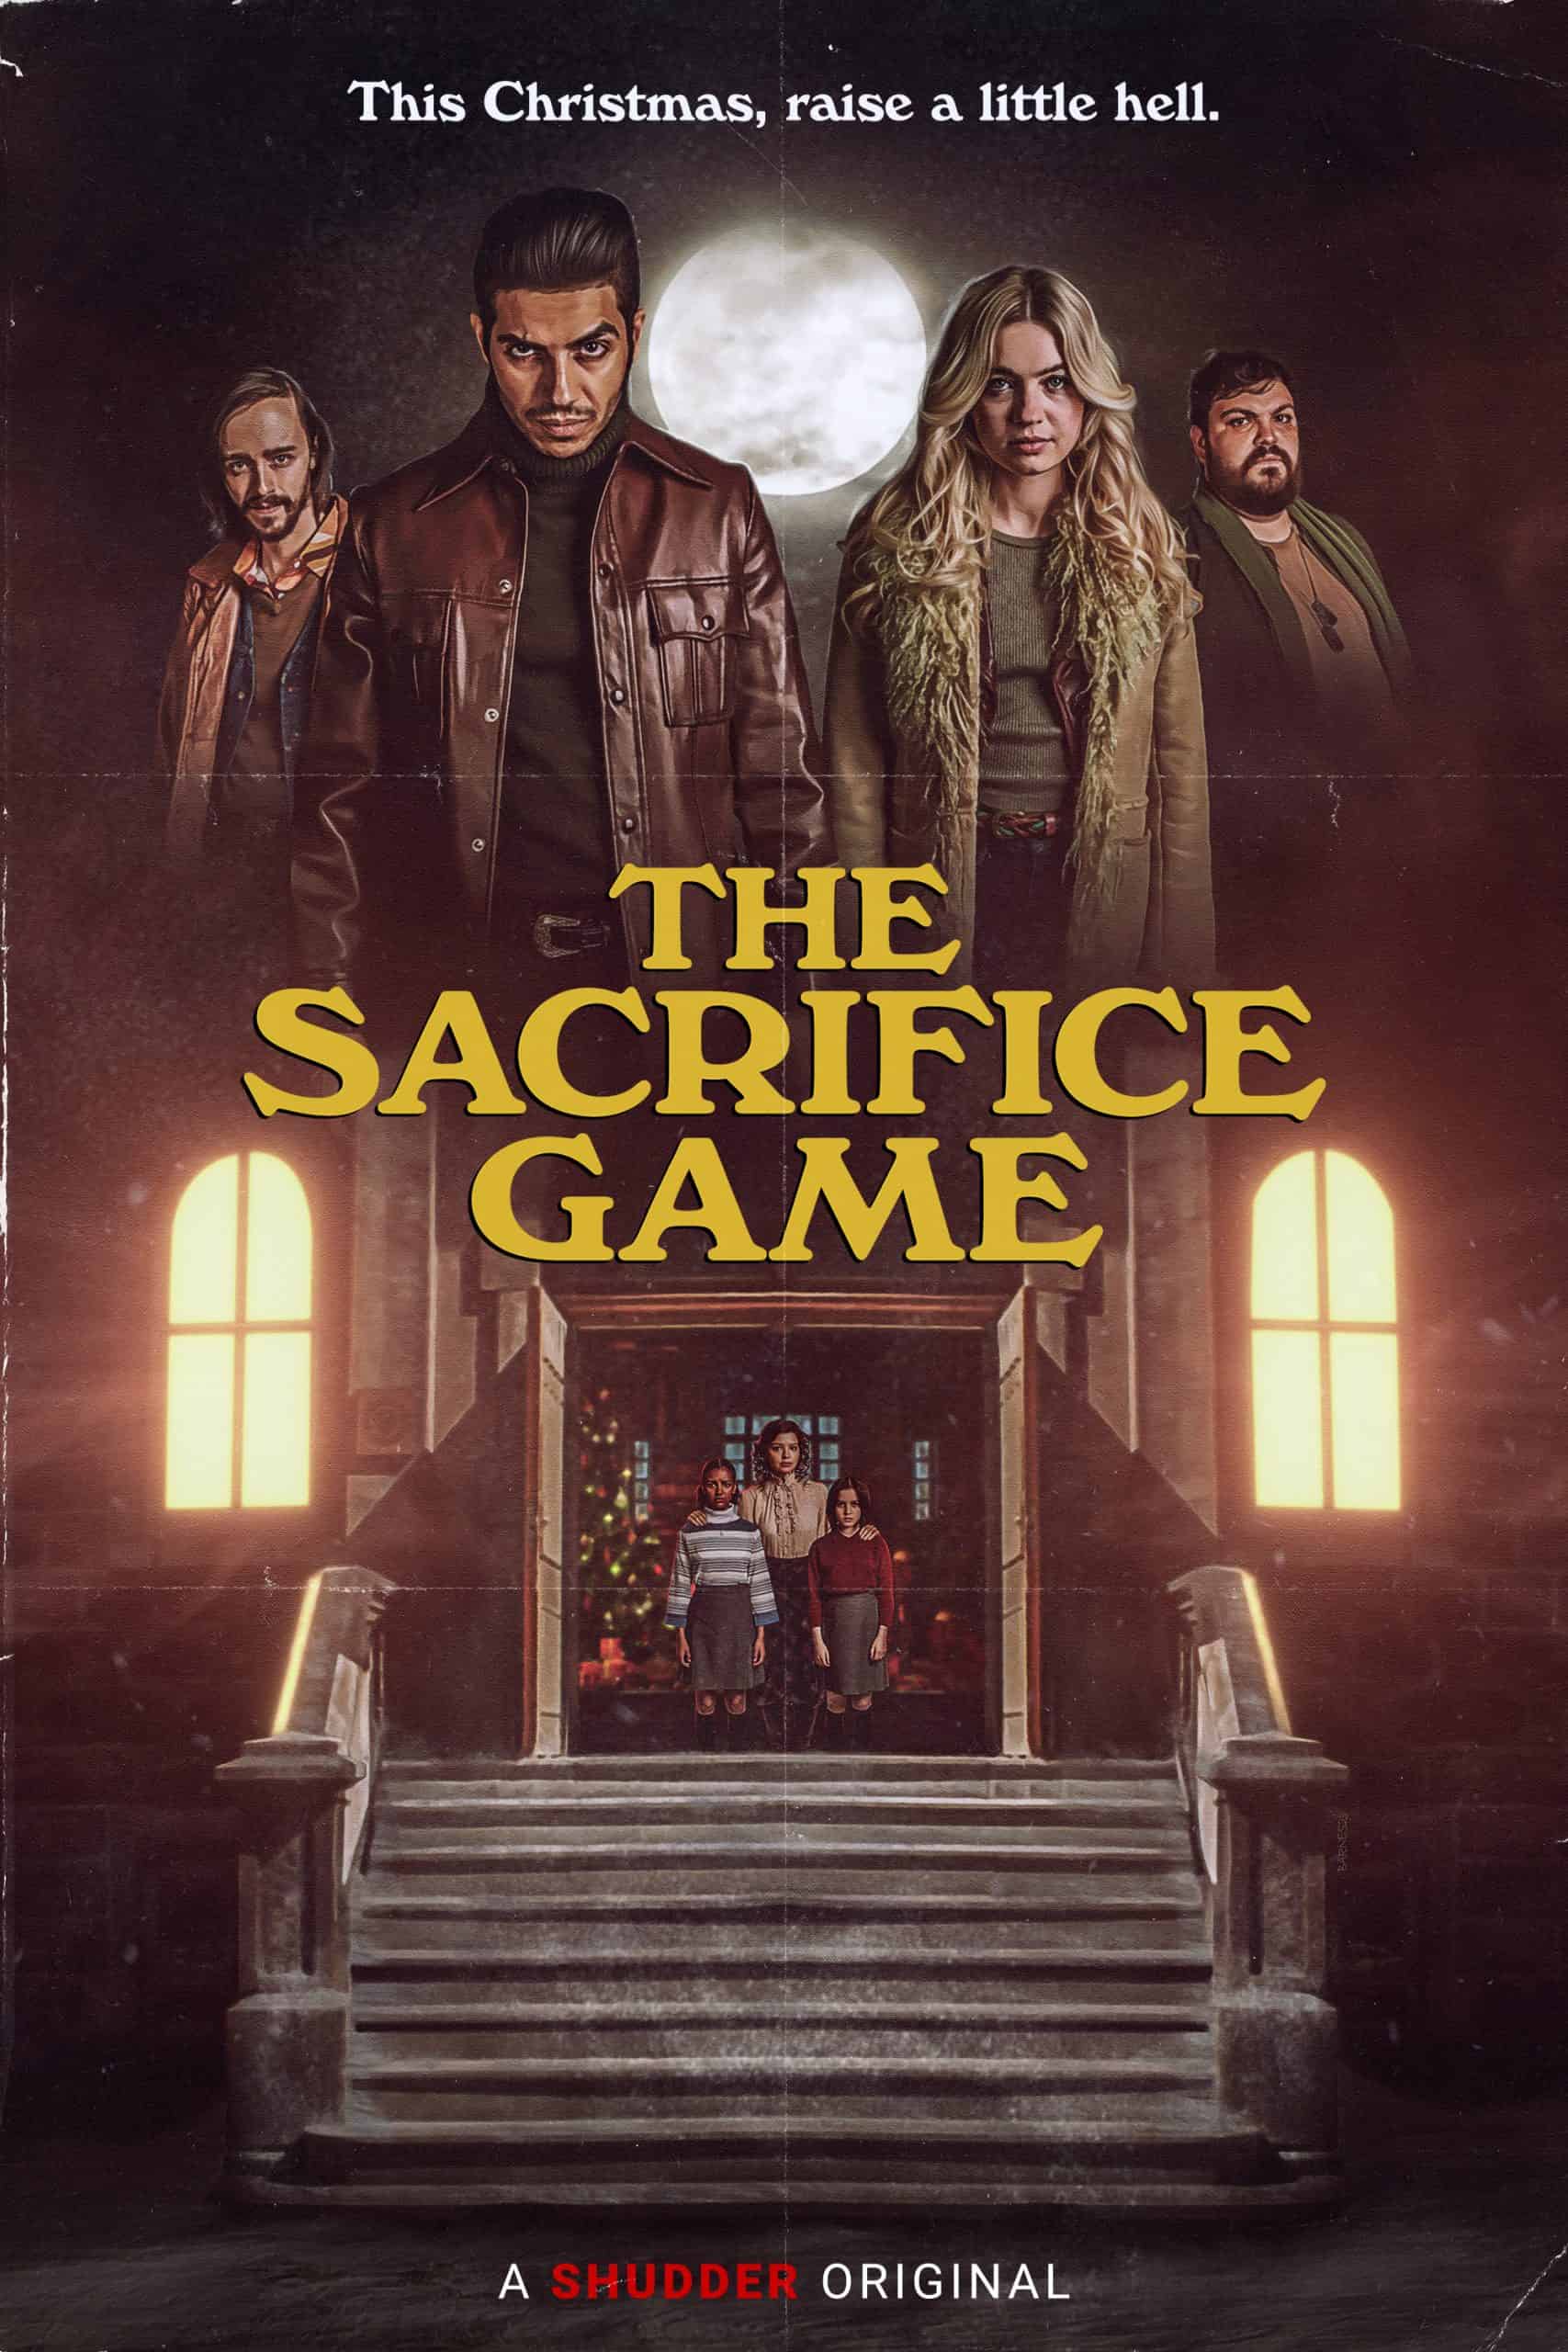 The Sacrifice Game: A Chilling Holiday Thriller Streaming on Shudder 64